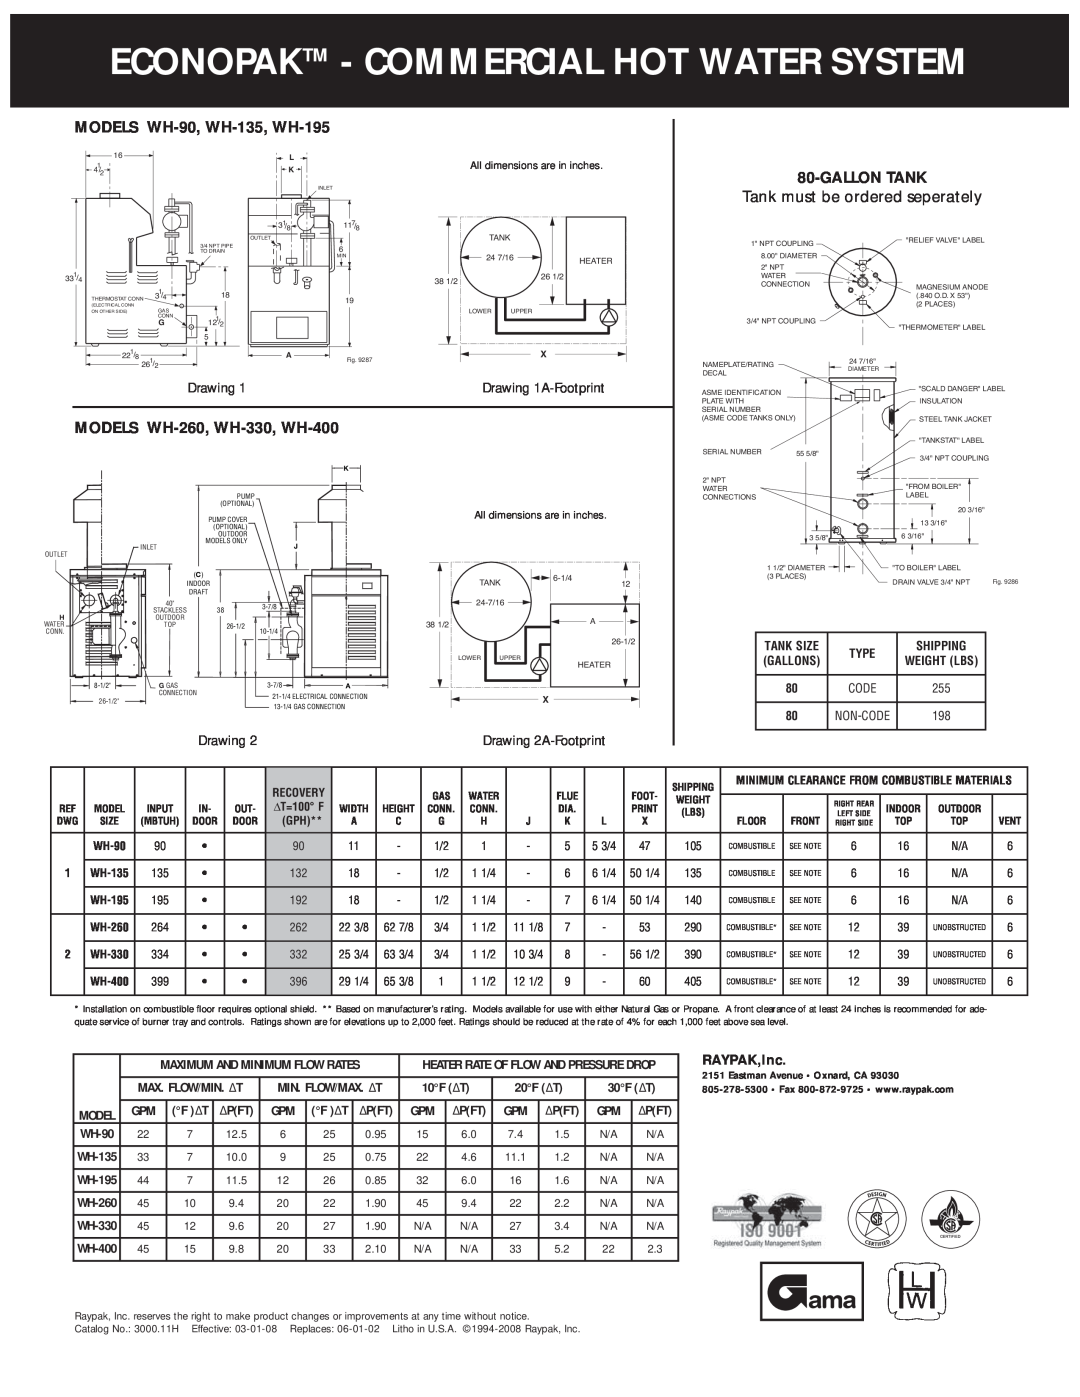 Raypak warranty Econopaktm - Commercial Hot Water System, MODELS WH-90, WH-135, WH-195, Gallontank, Drawing, RAYPAK,Inc 